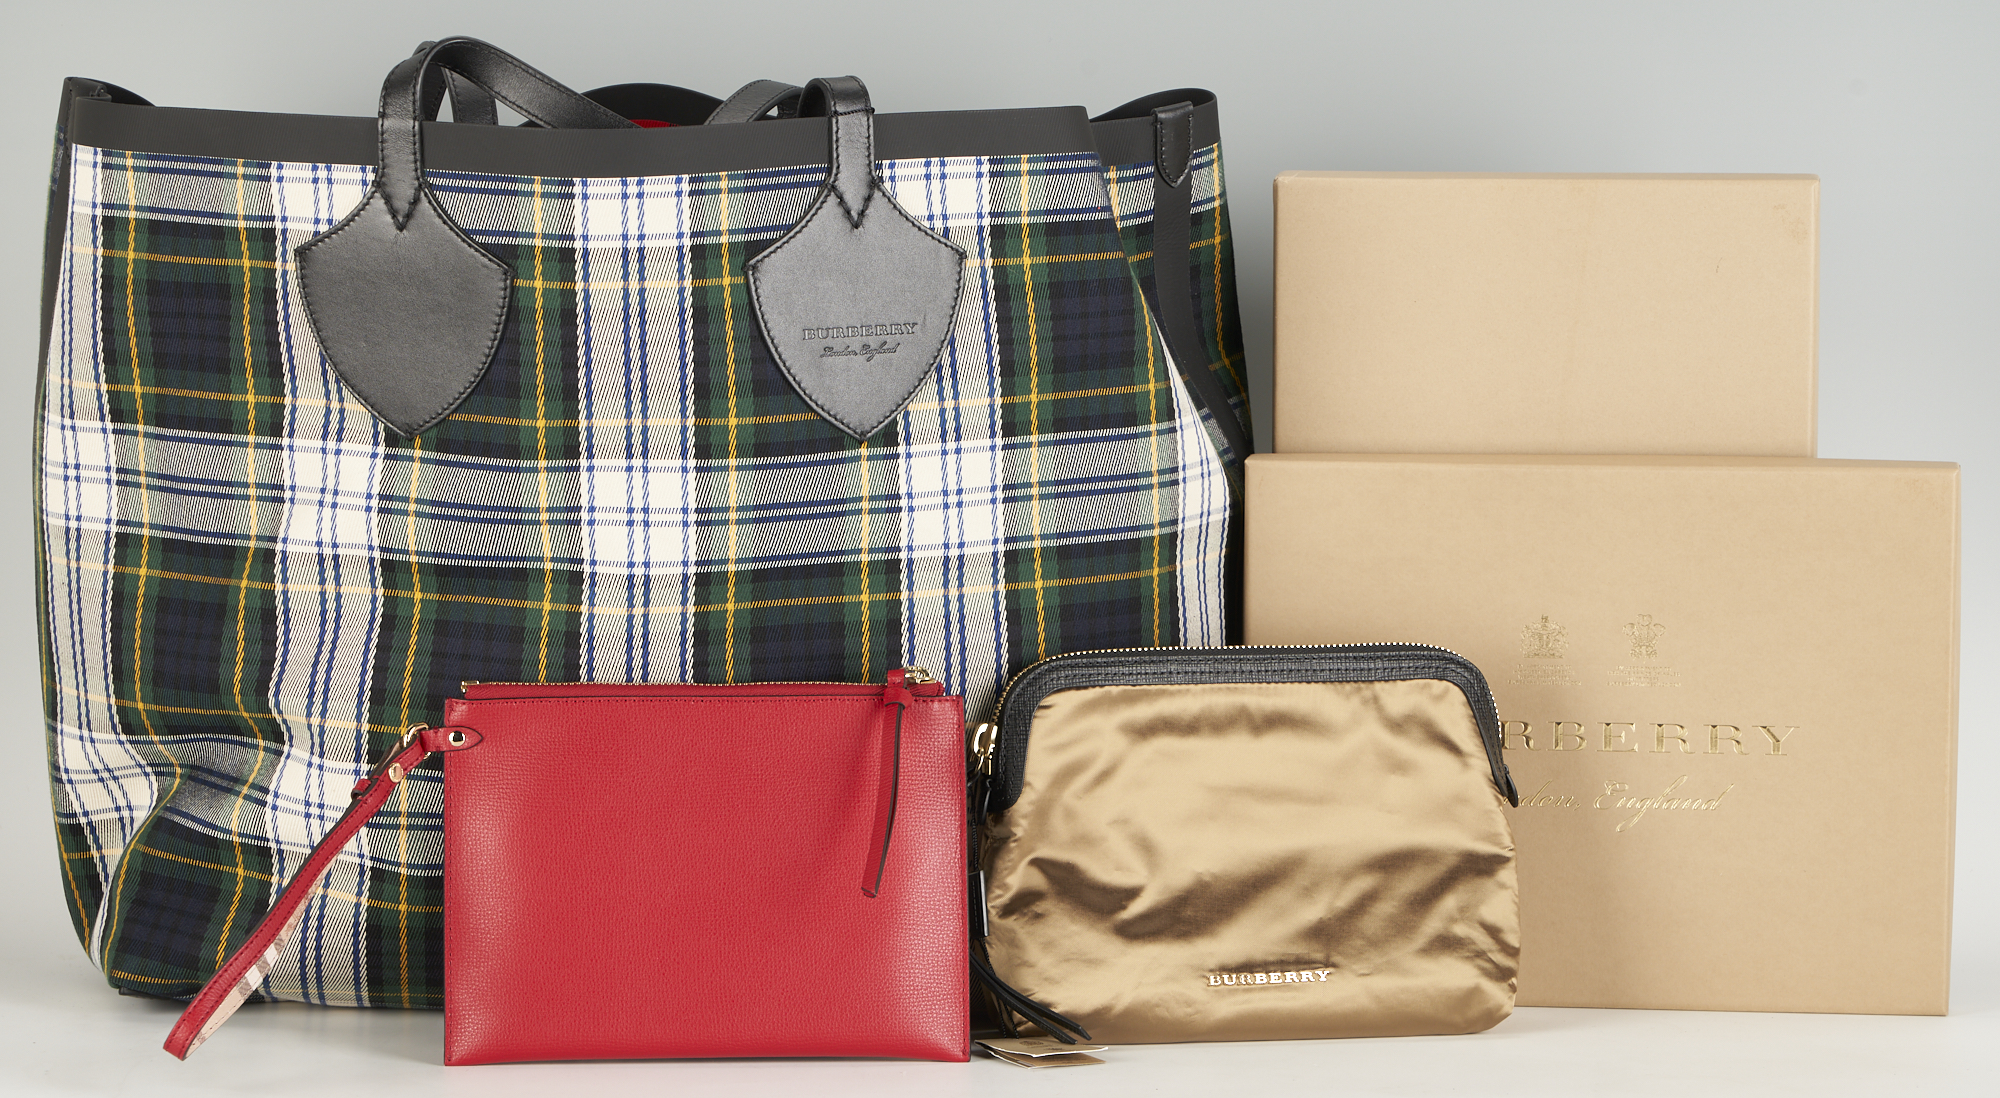 Burberry Check Canvas Reversible Tote - Red Totes, Handbags